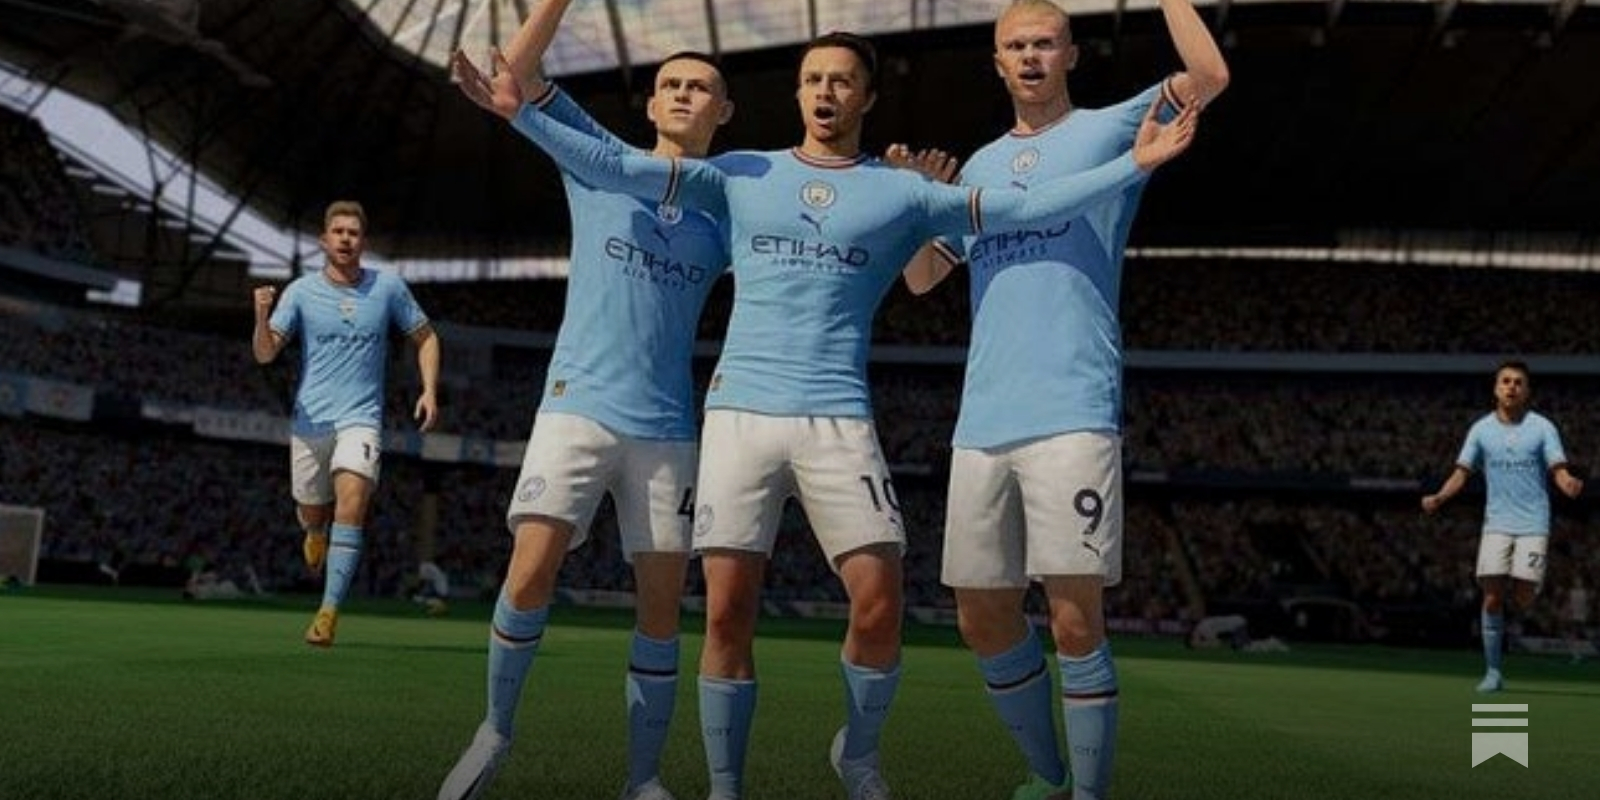 FIFA 23 review: EA Sport's final FIFA title is a fitting entry to the end  of an era